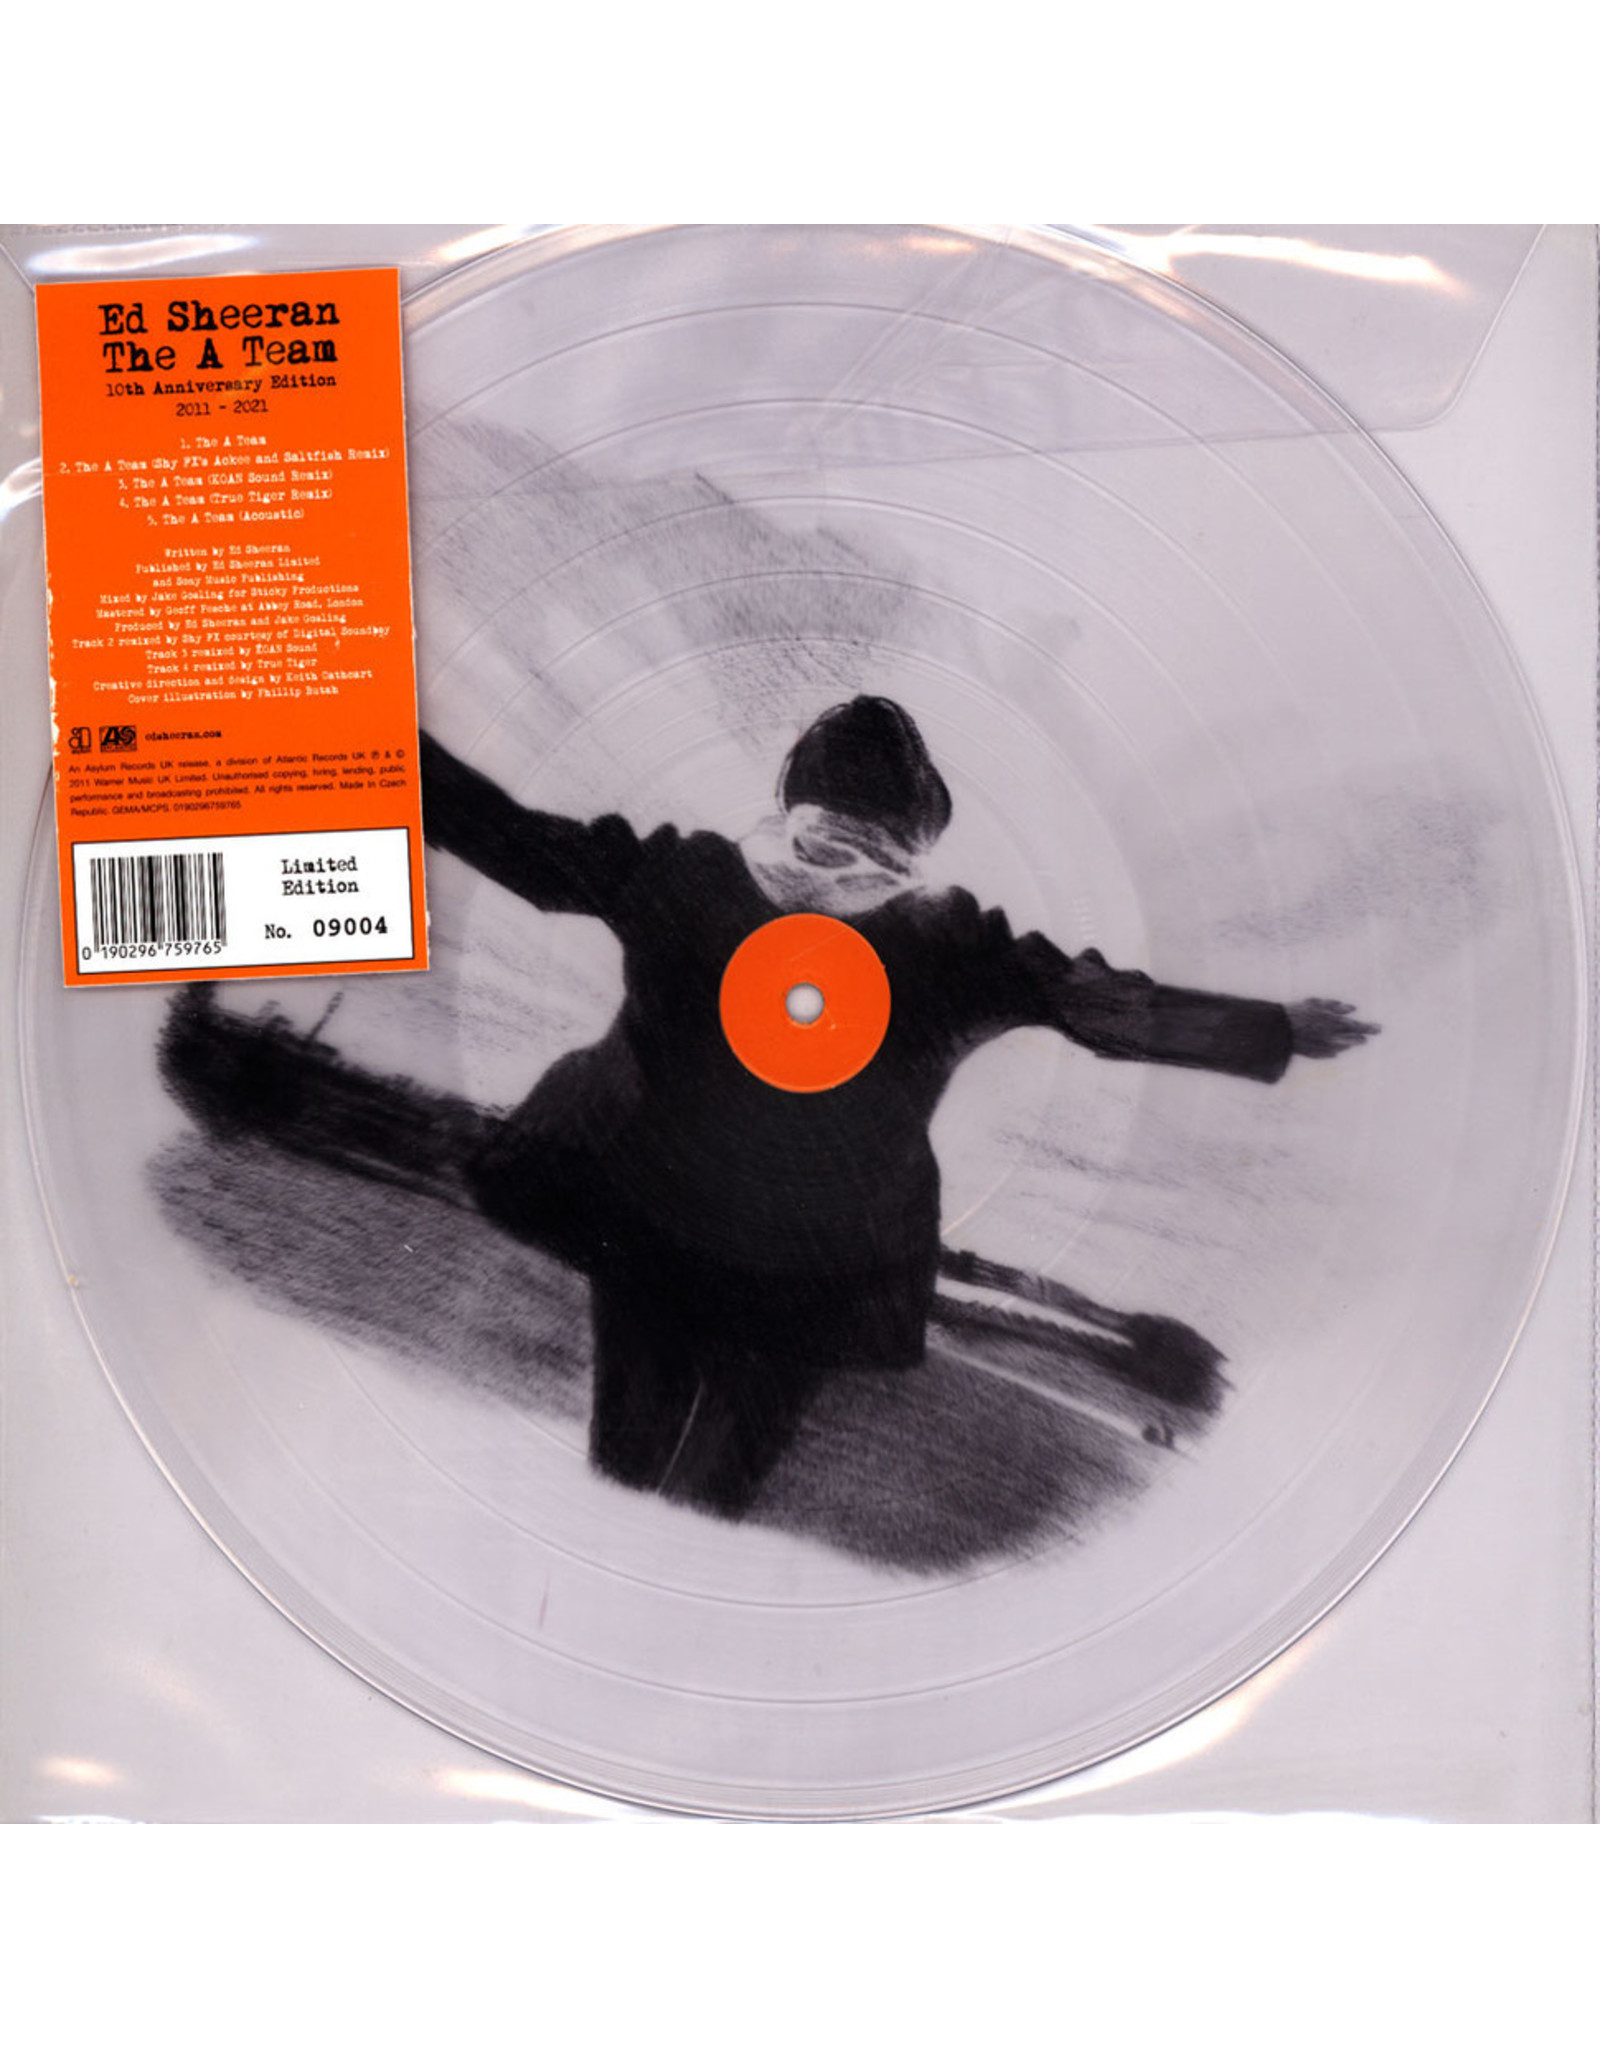 Ed Sheeran - The A-Team EP (Record Store Day) [Clear Vinyl] - Pop 